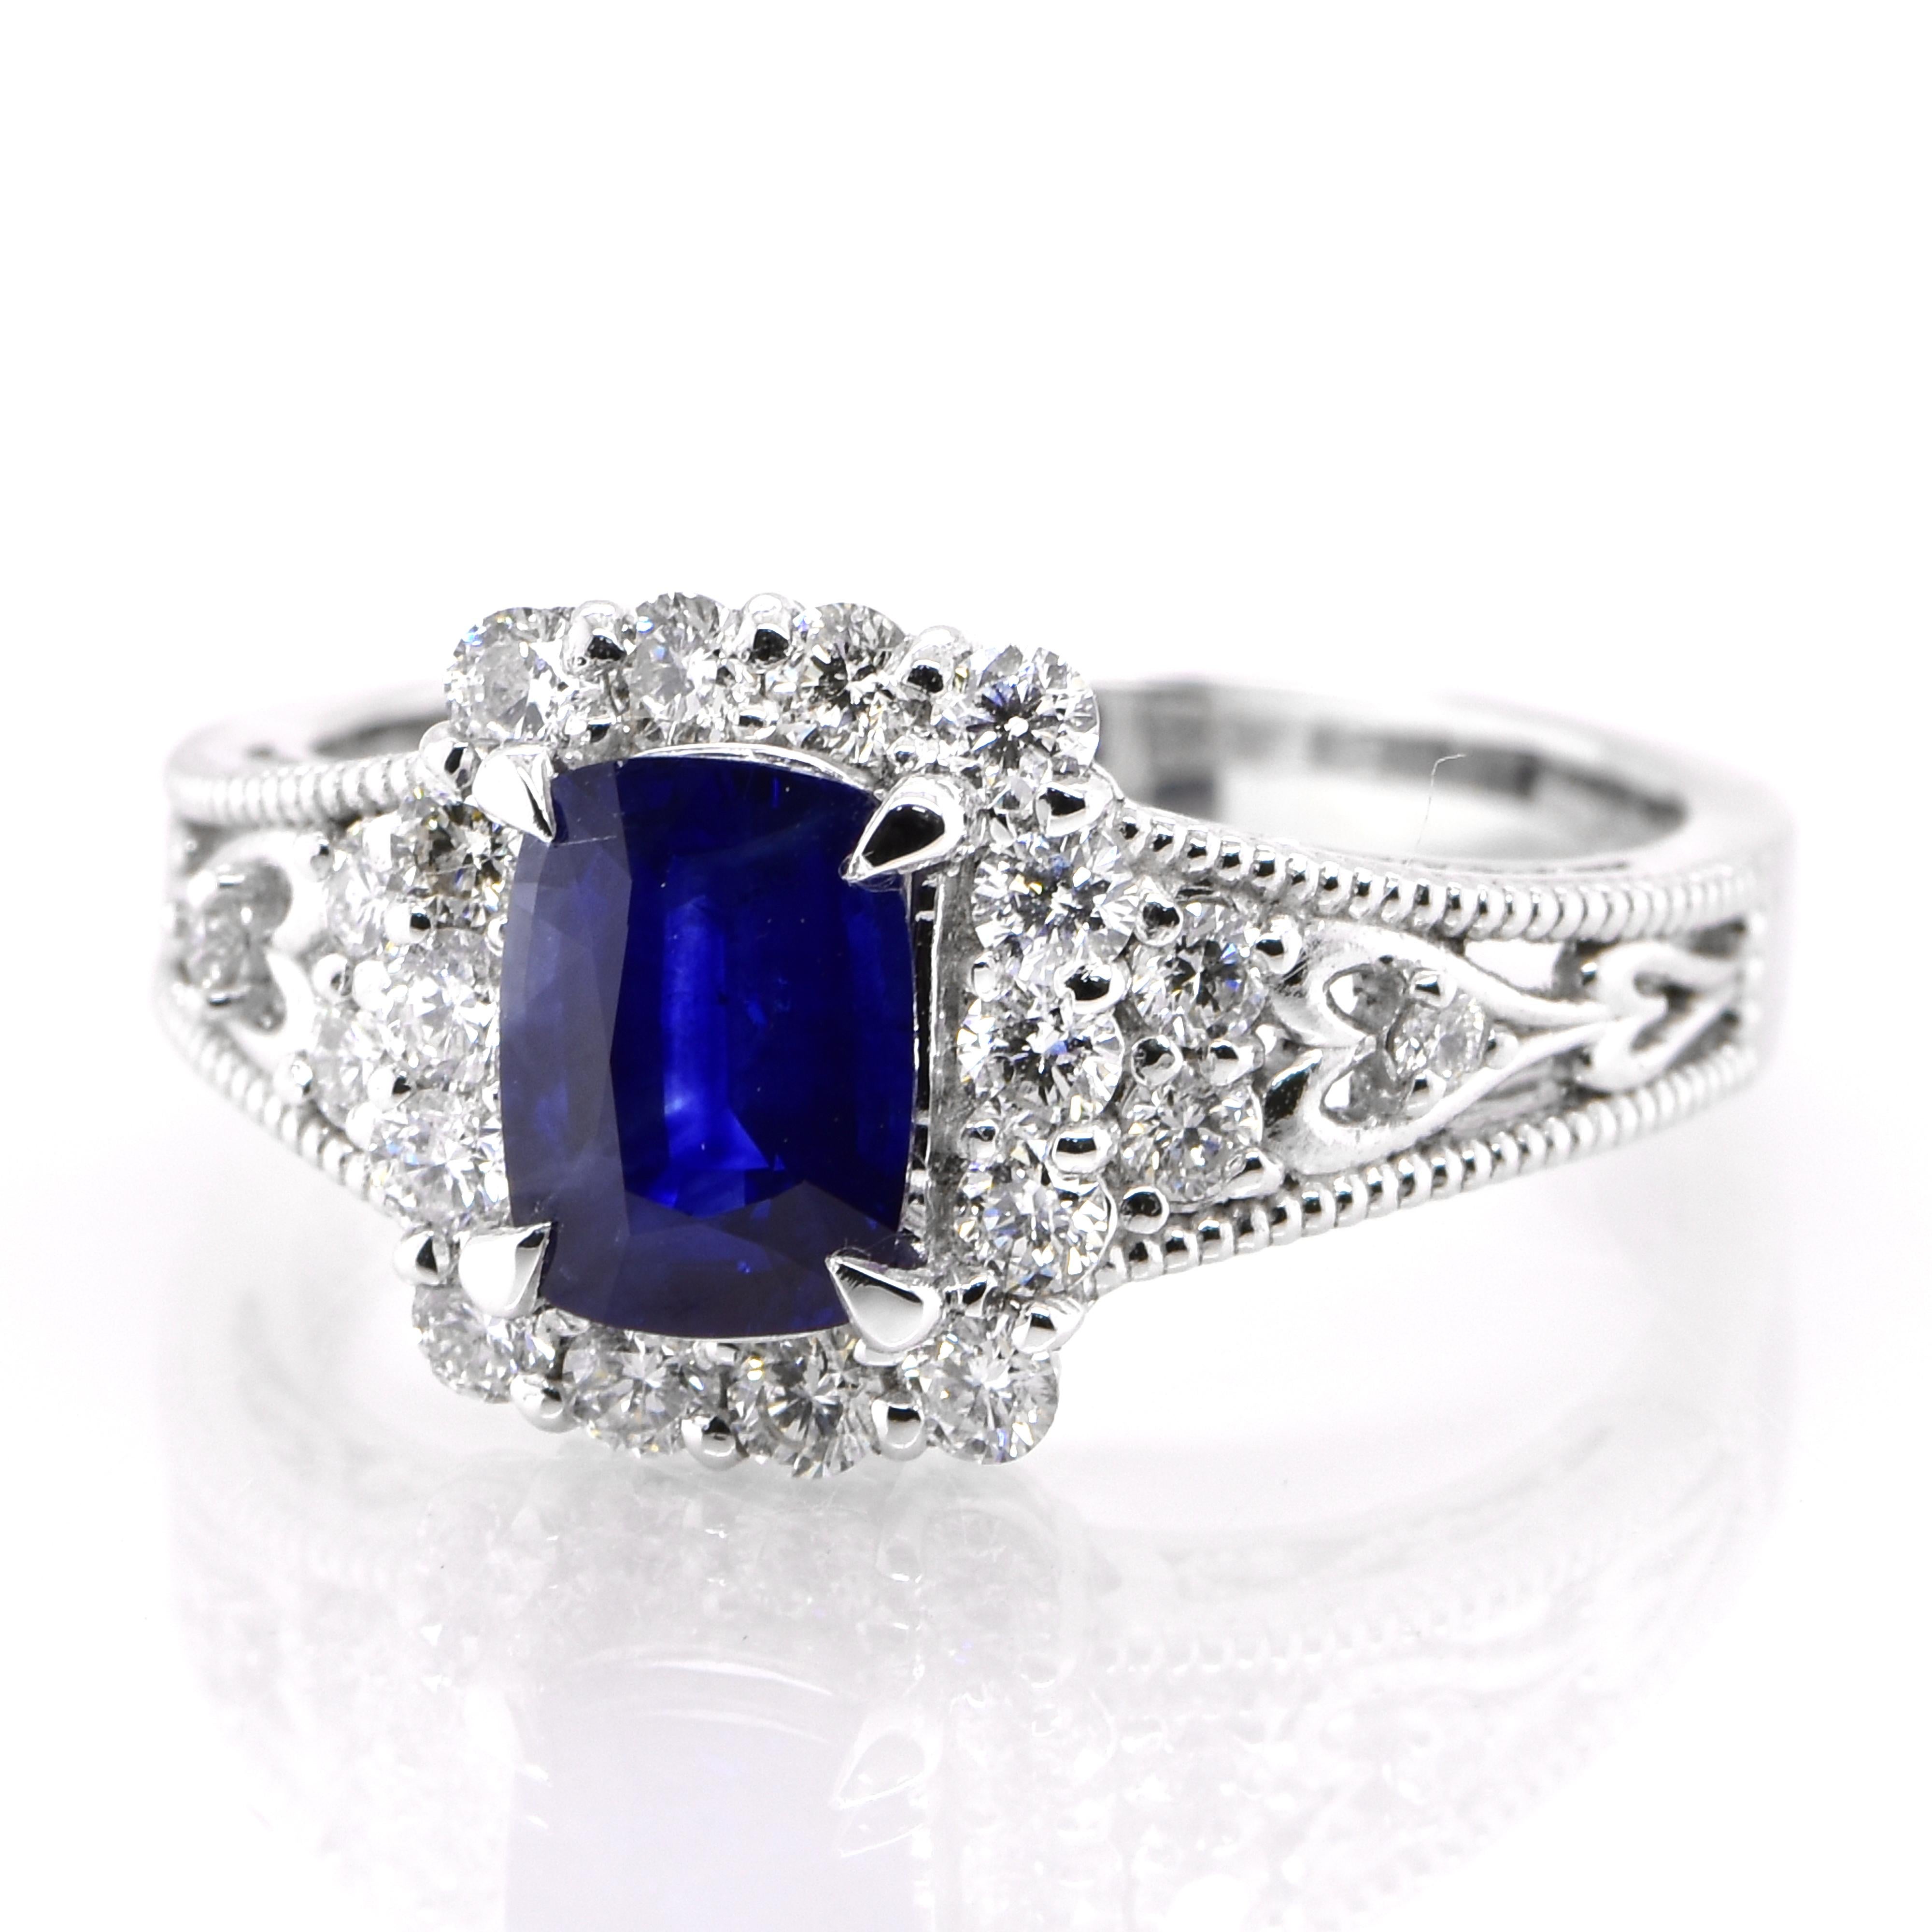 A beautiful ring featuring 1.24 Carat Natural Blue Sapphire and 0.52 Carats Diamond Accents set in Platinum. Sapphires have extraordinary durability - they excel in hardness as well as toughness and durability making them very popular in jewelry.